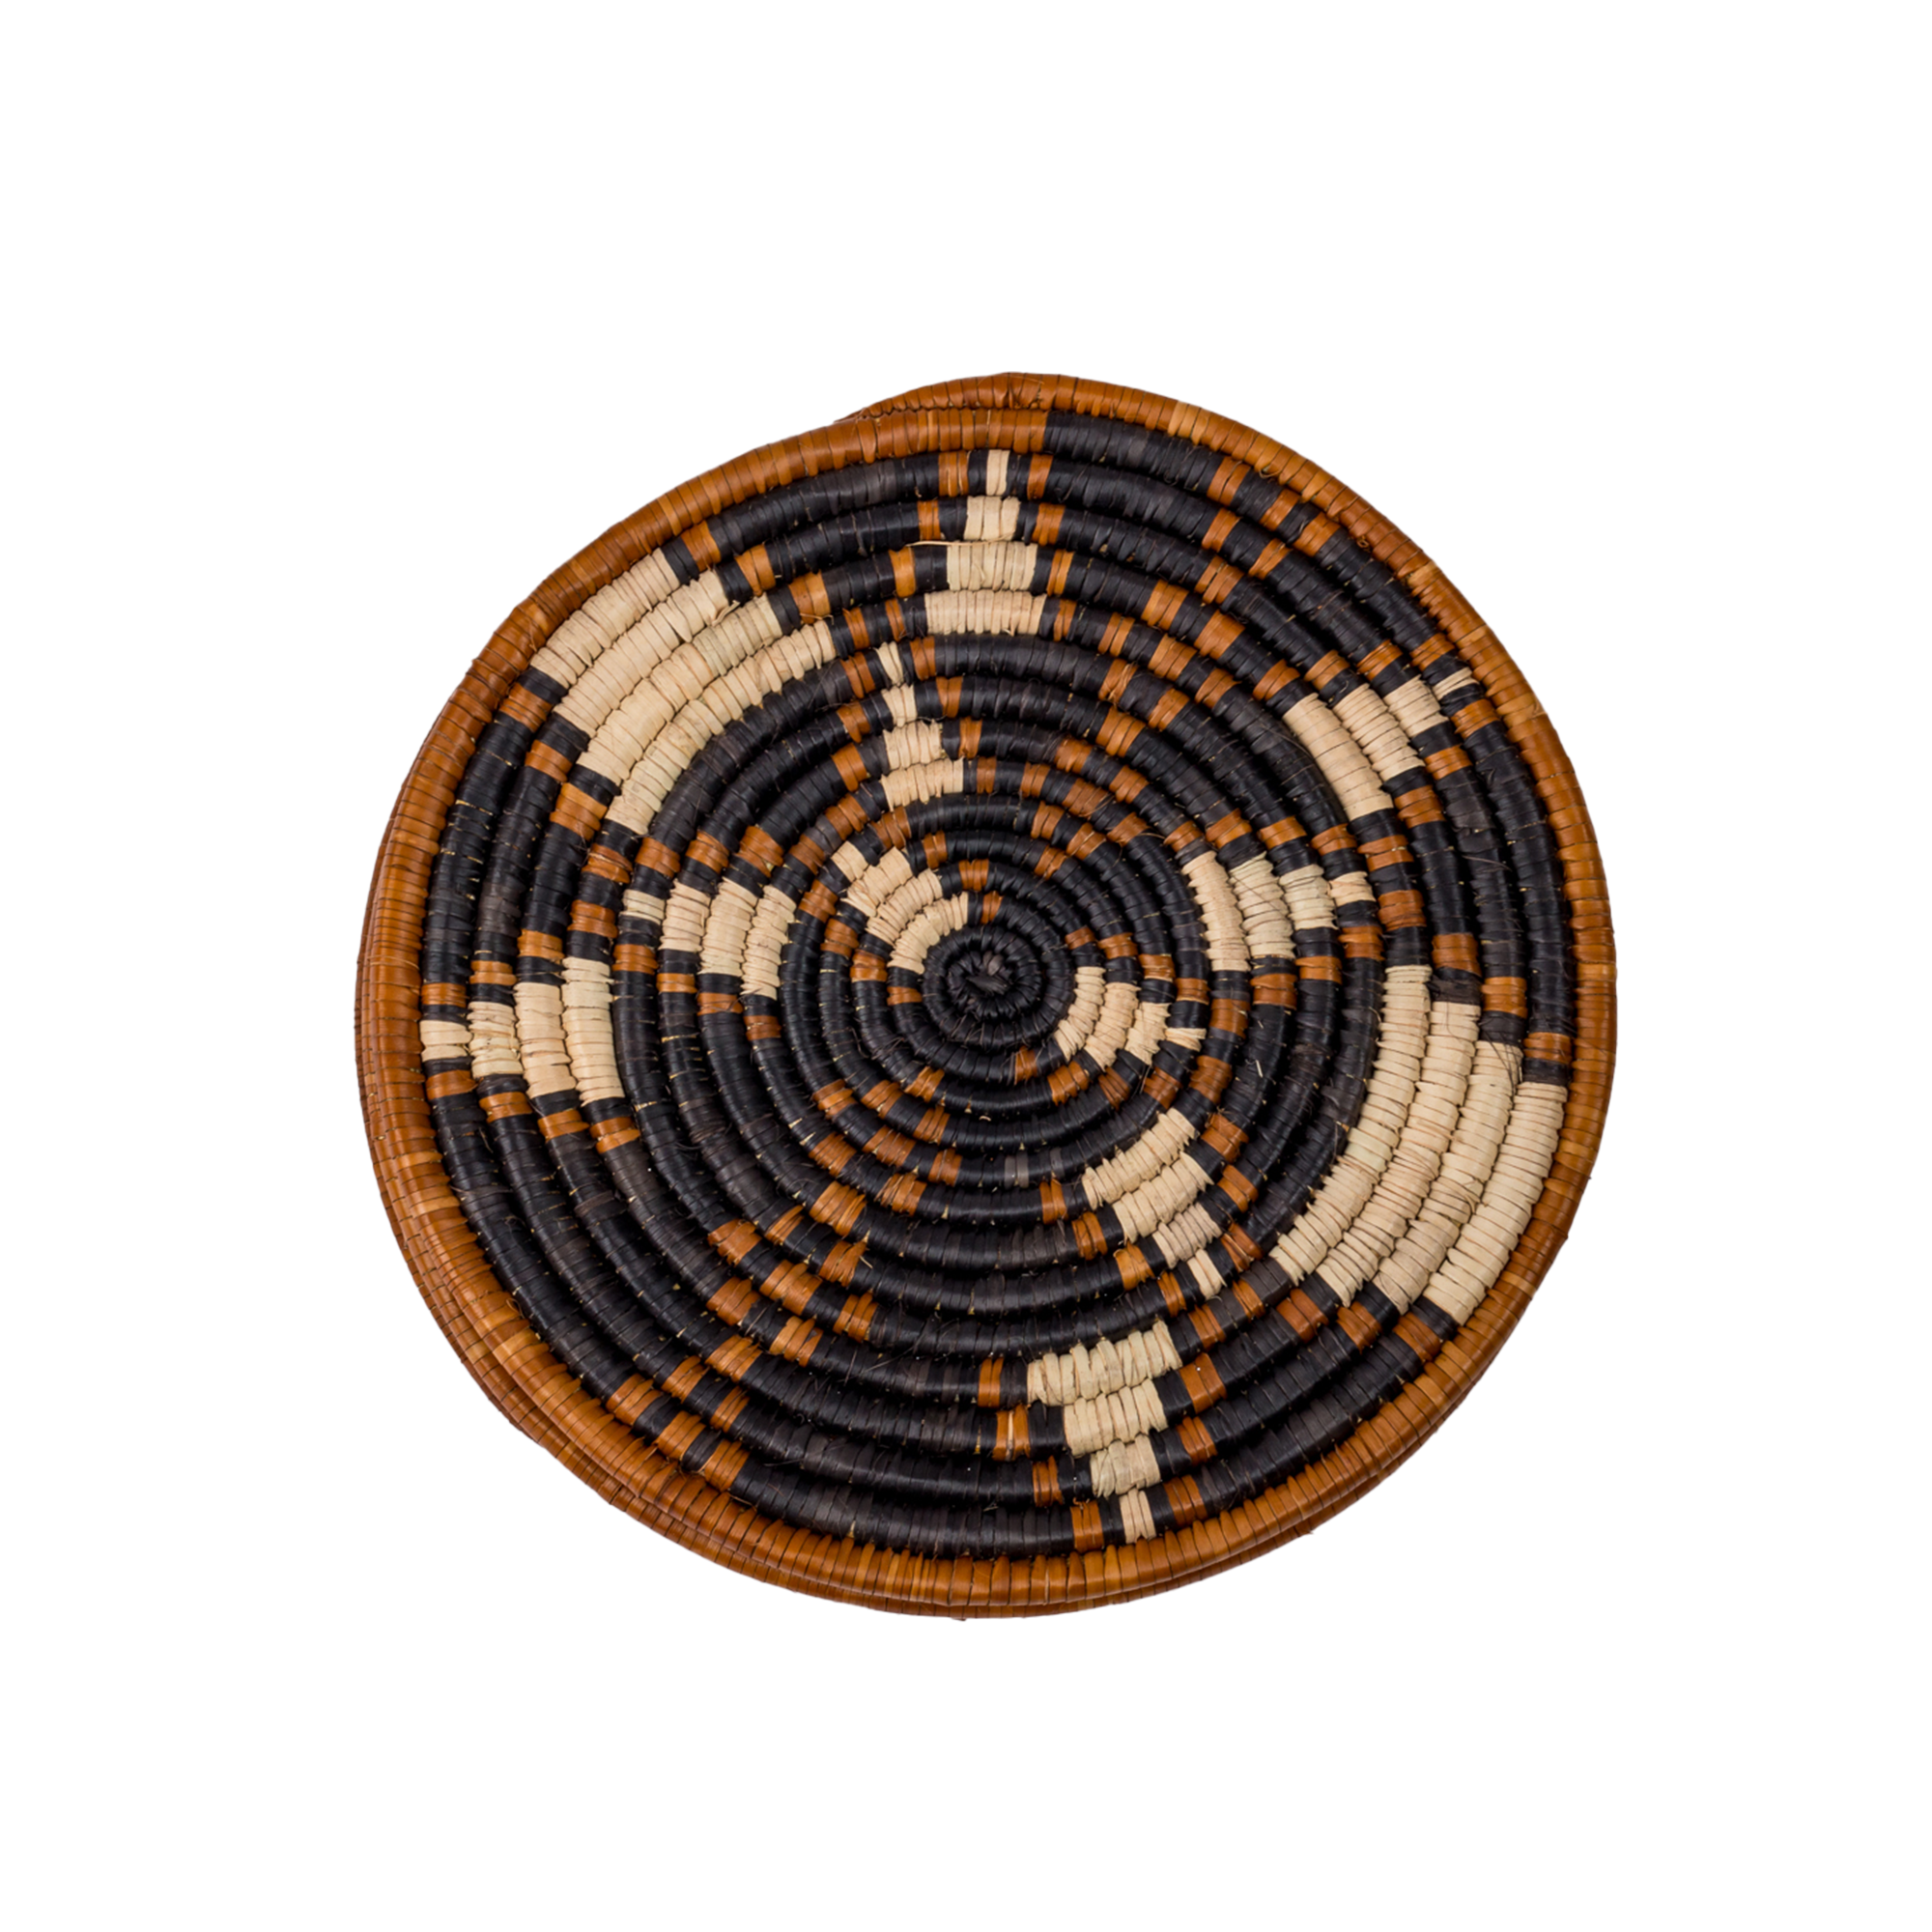 Hand Woven Reed Placemats (4 Pack)